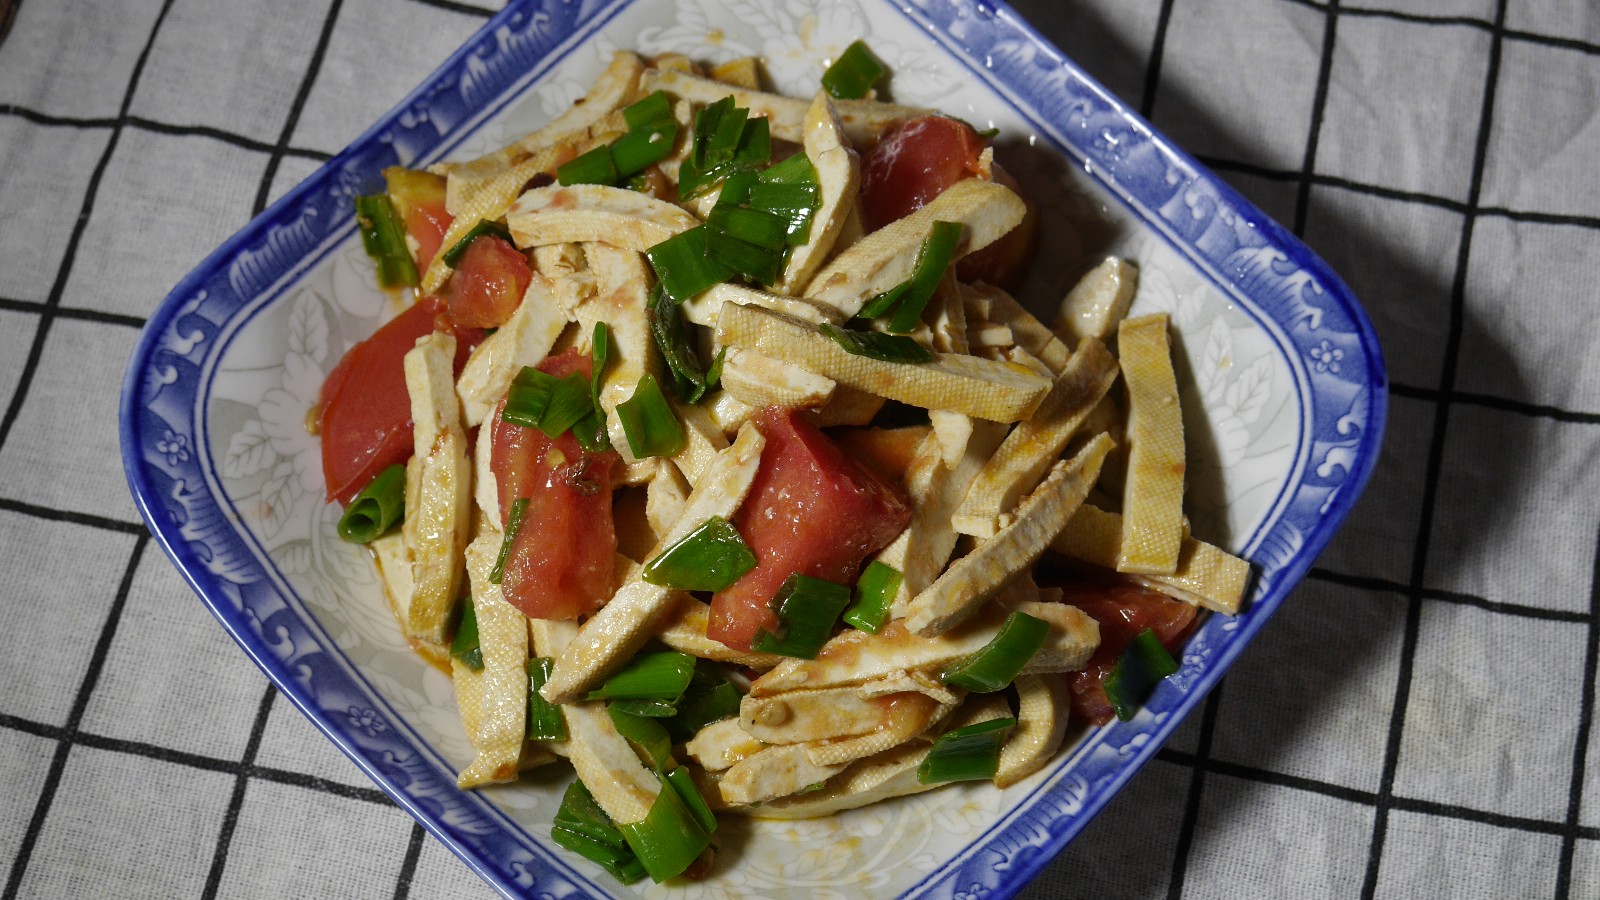 Stir-fried bean curd tomatoes, the most popular home dish in dog days